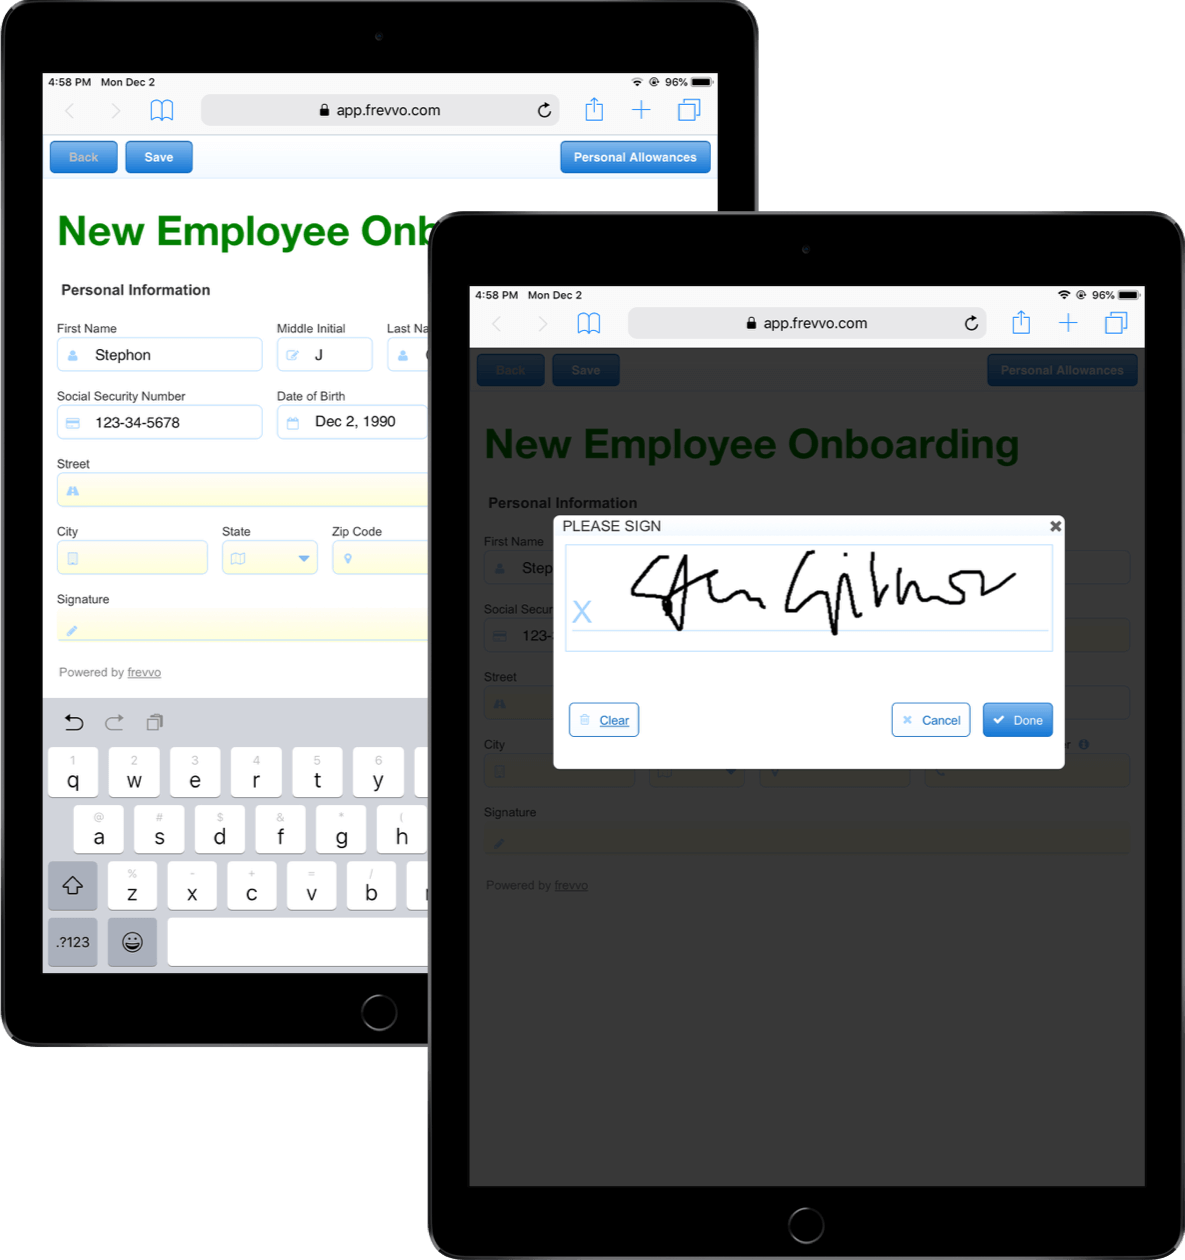 Digital signatures on all devices